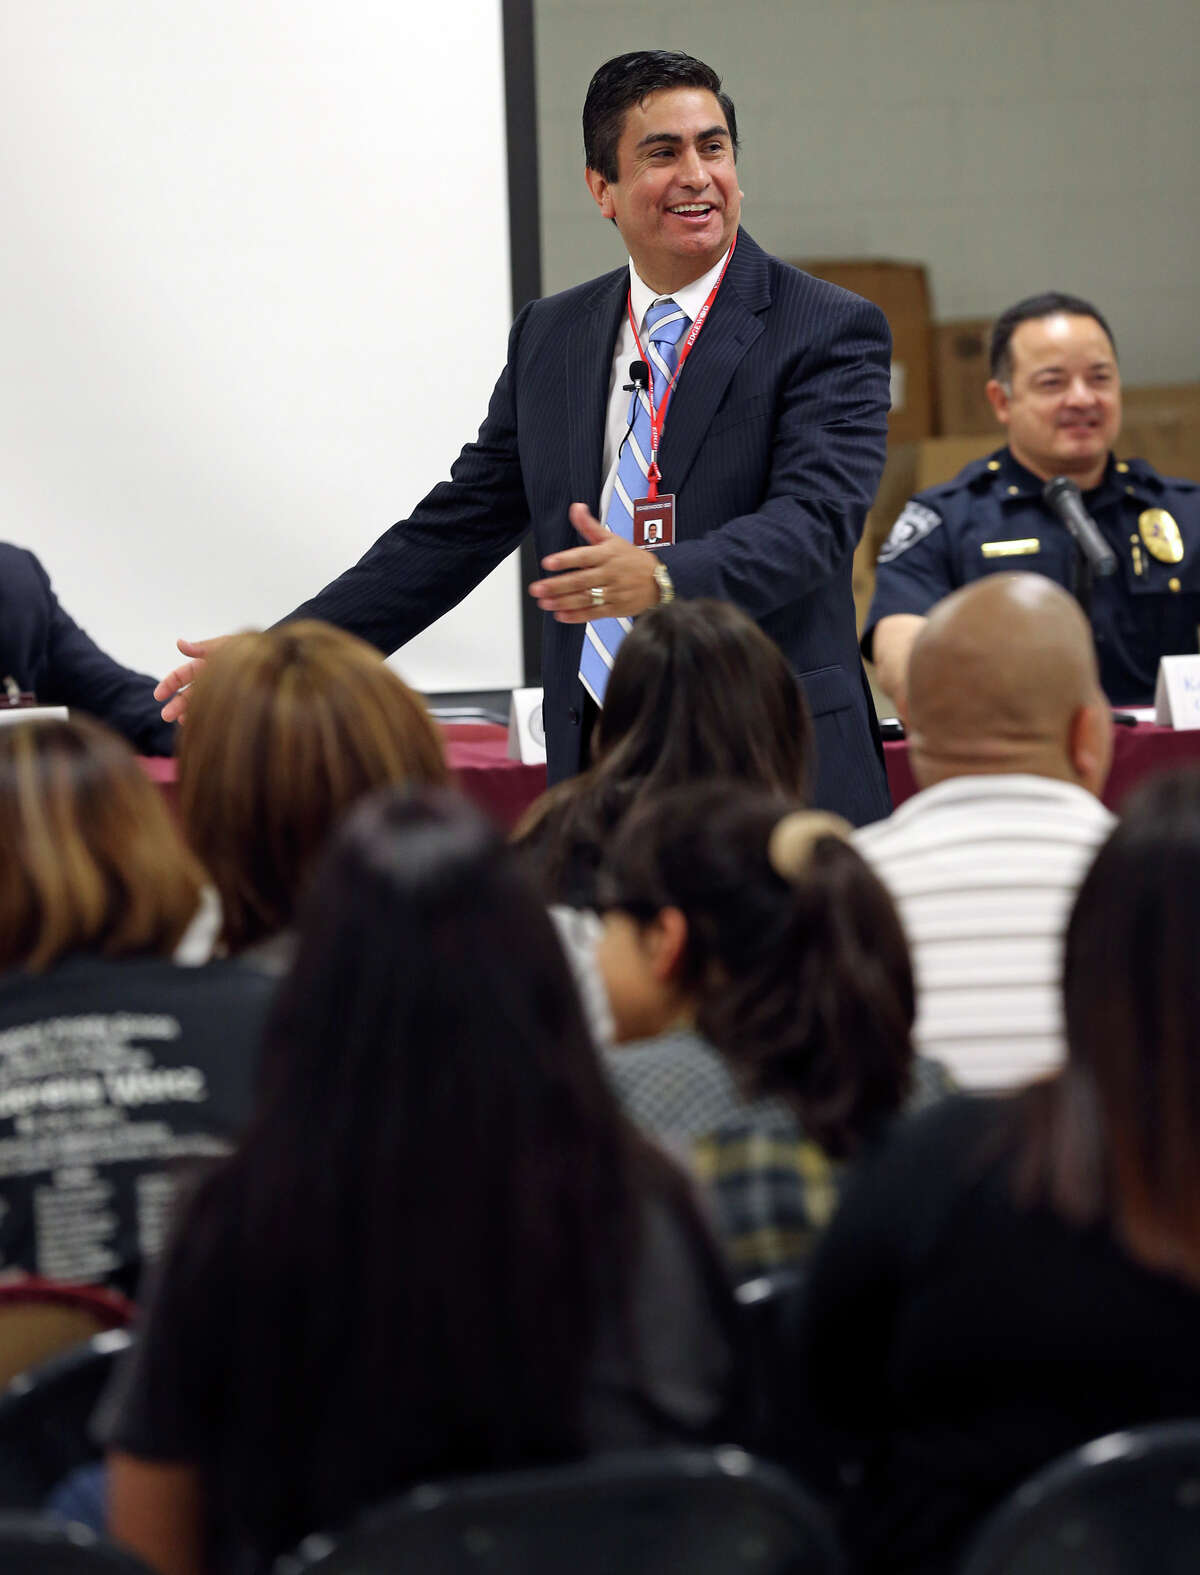 Edgewood ISD superintendent Dr. Jose Cervantes speaks at a one hour town hall meeting with parents to answer questions about security in the district on February 7, 2013.